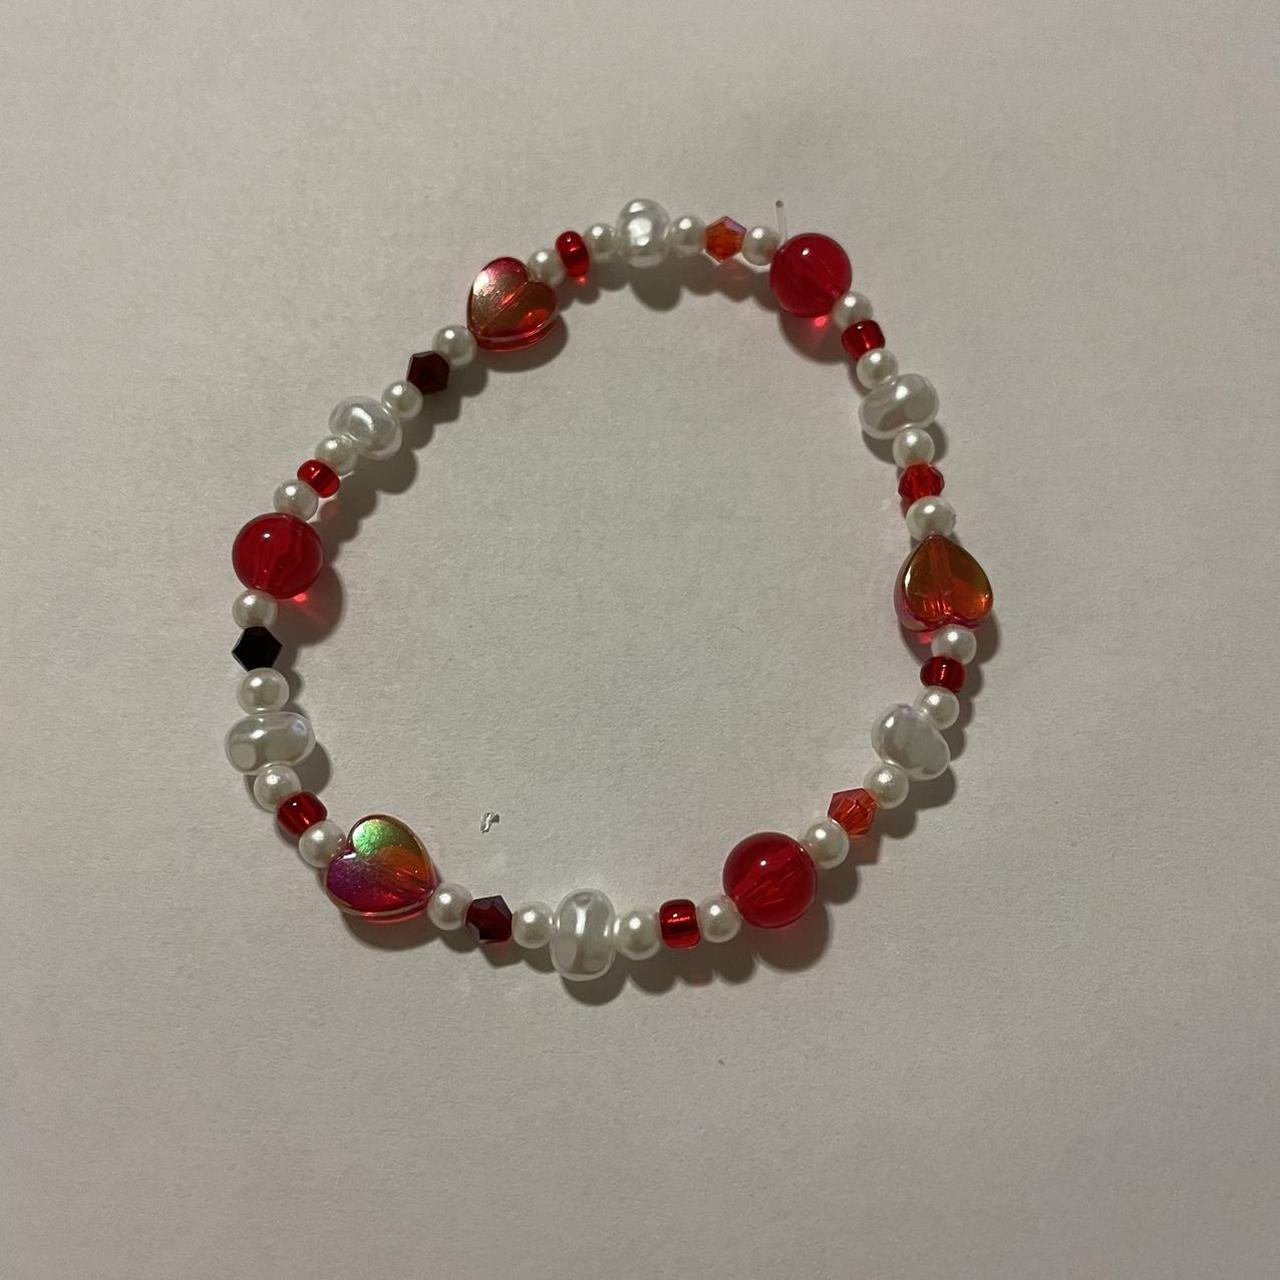 Women's White and Red Jewellery